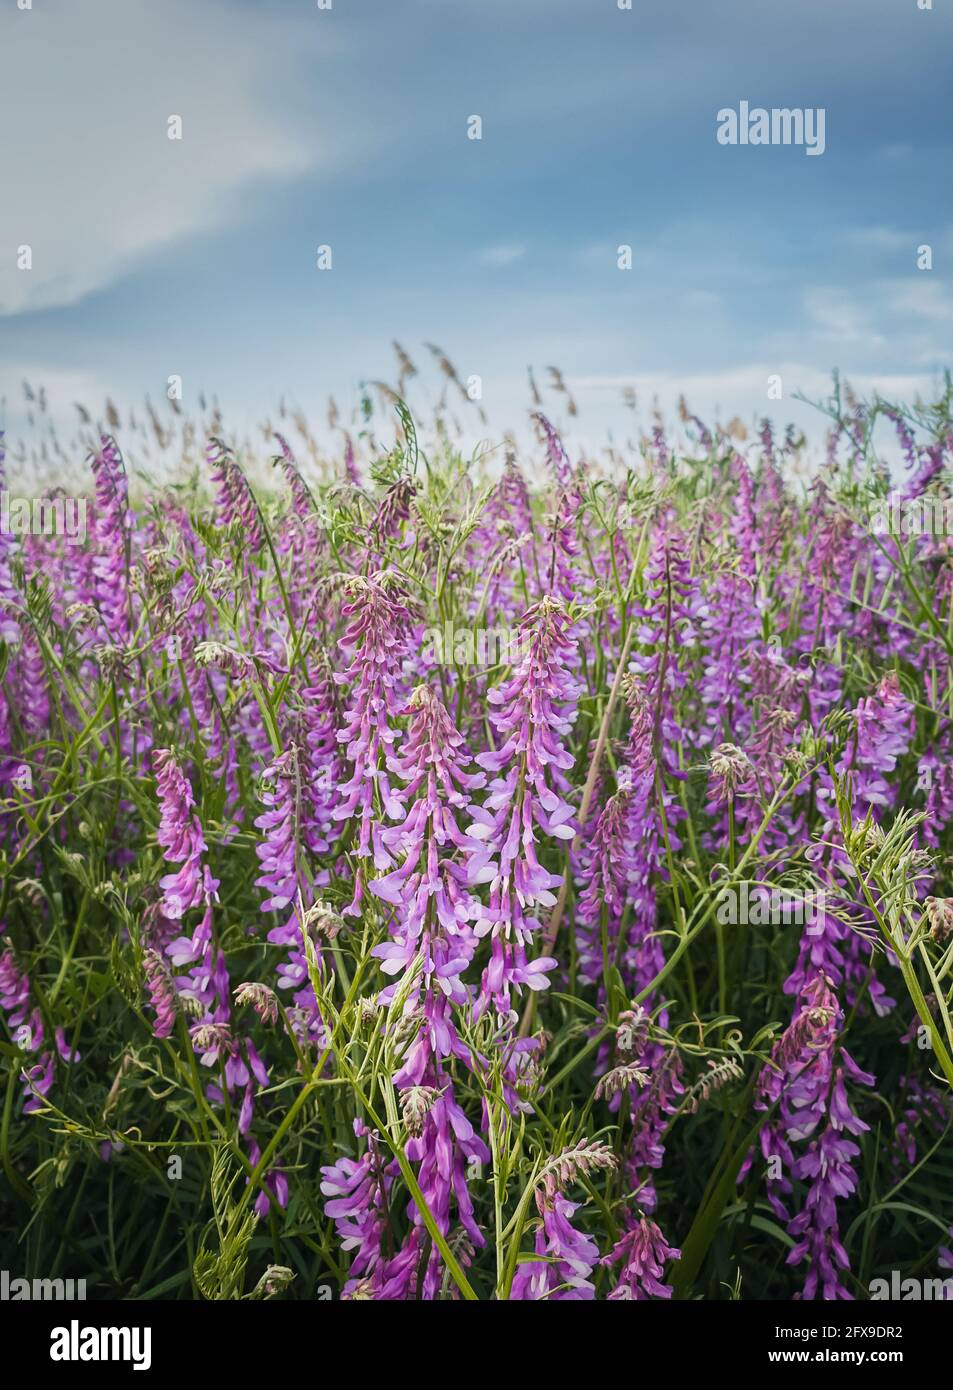 Purple meadow of blooming tufted vetch flowers. Wild vicia cracca, a scrambling plant with violet petals, similar to pea vegetation. Closeup picturesq Stock Photo